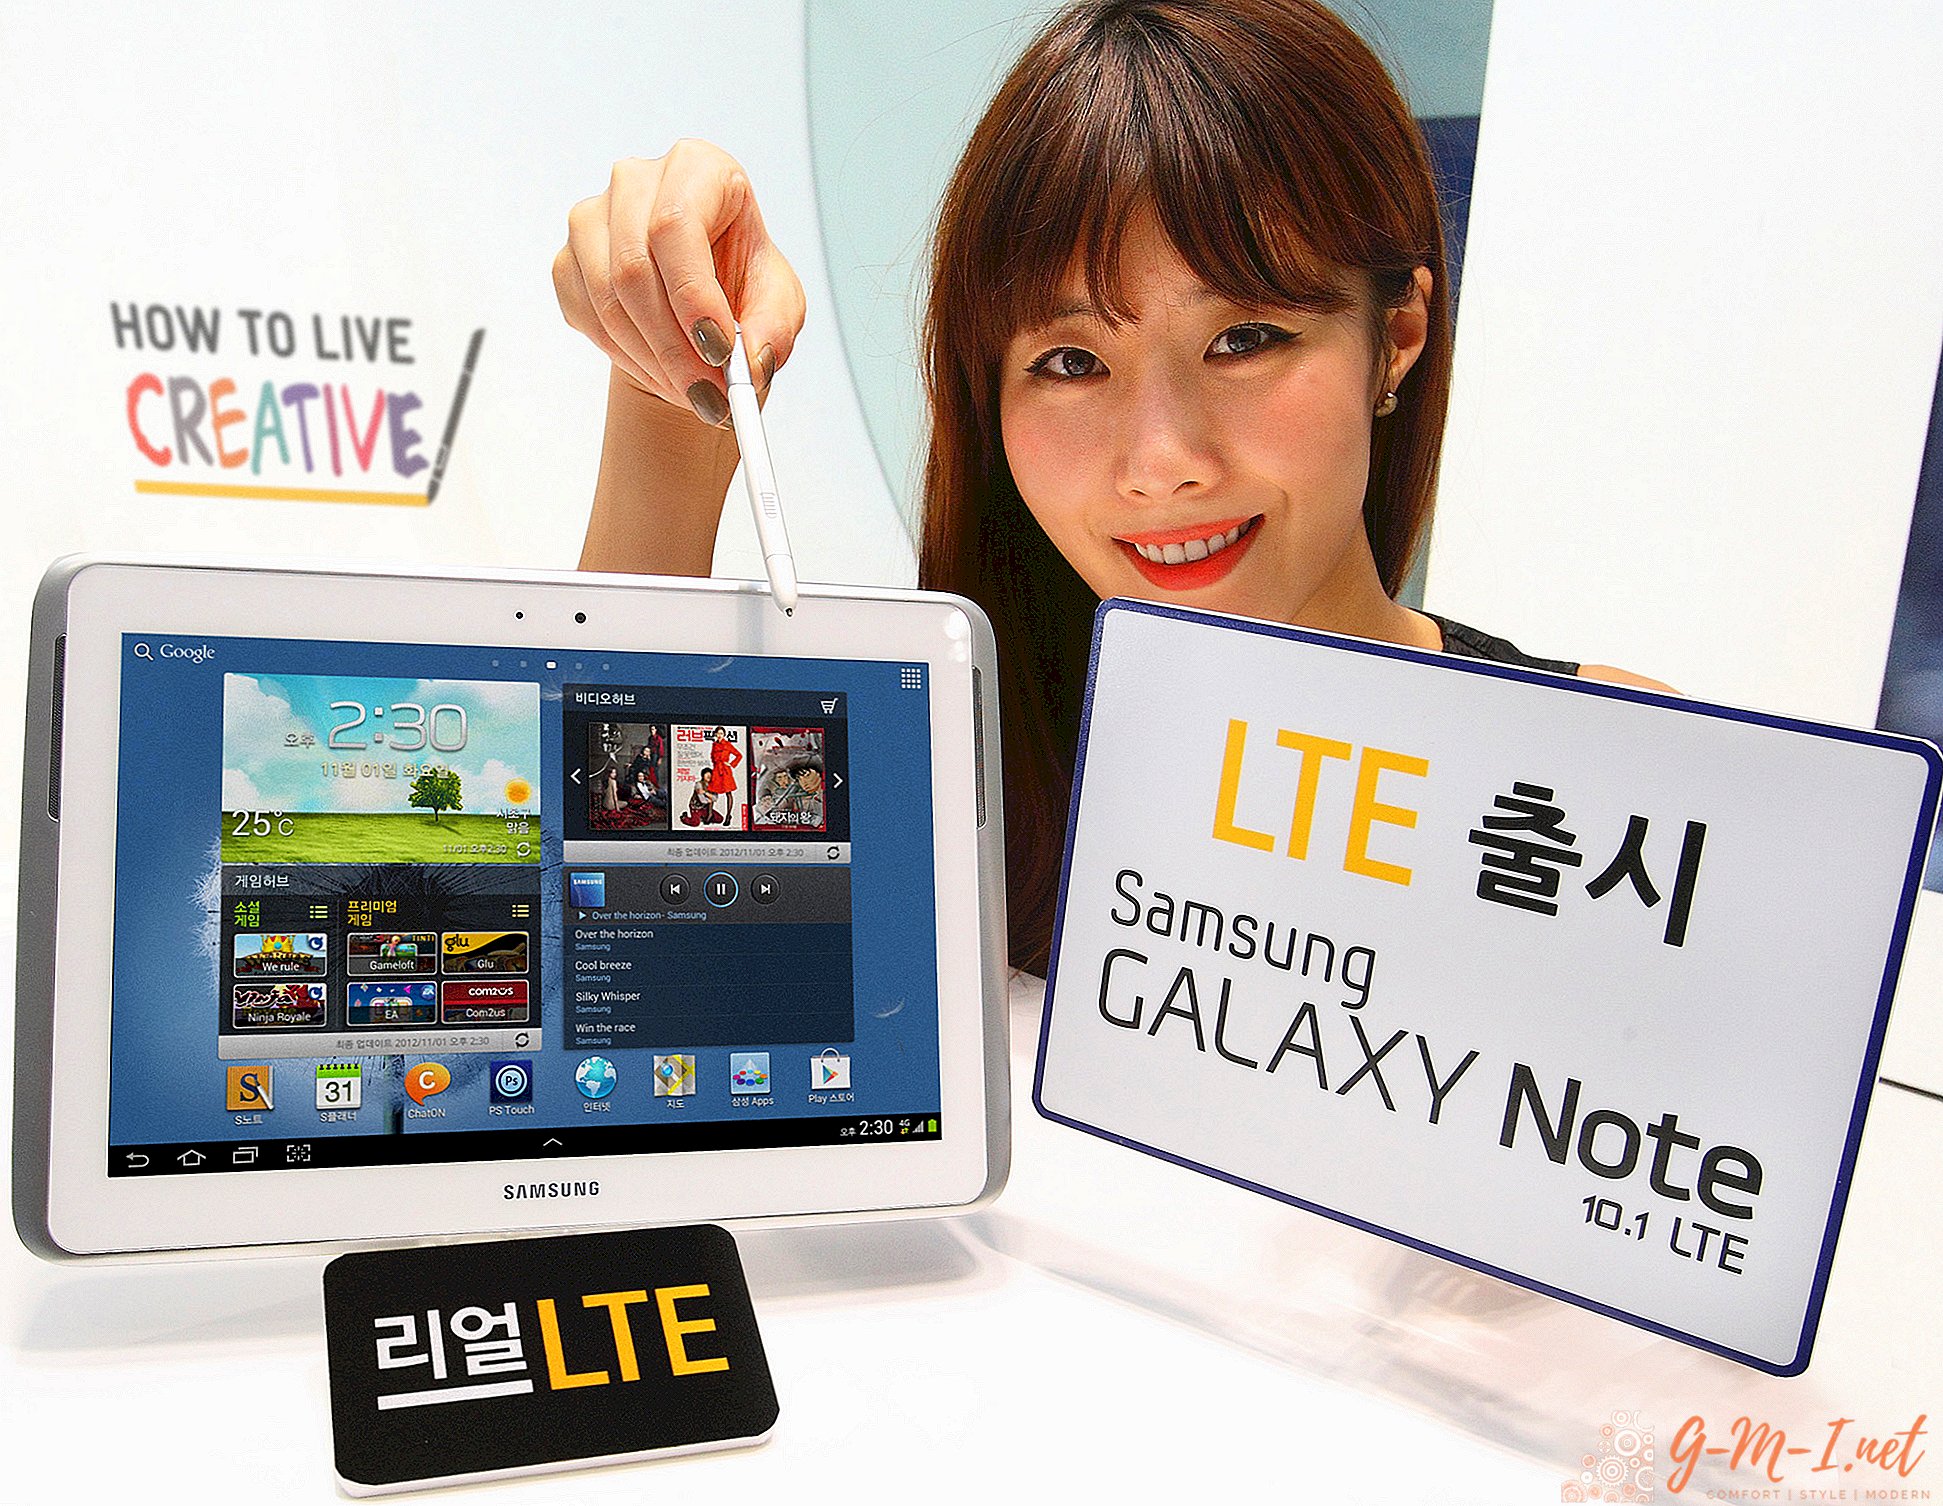 What is LTE in the tablet